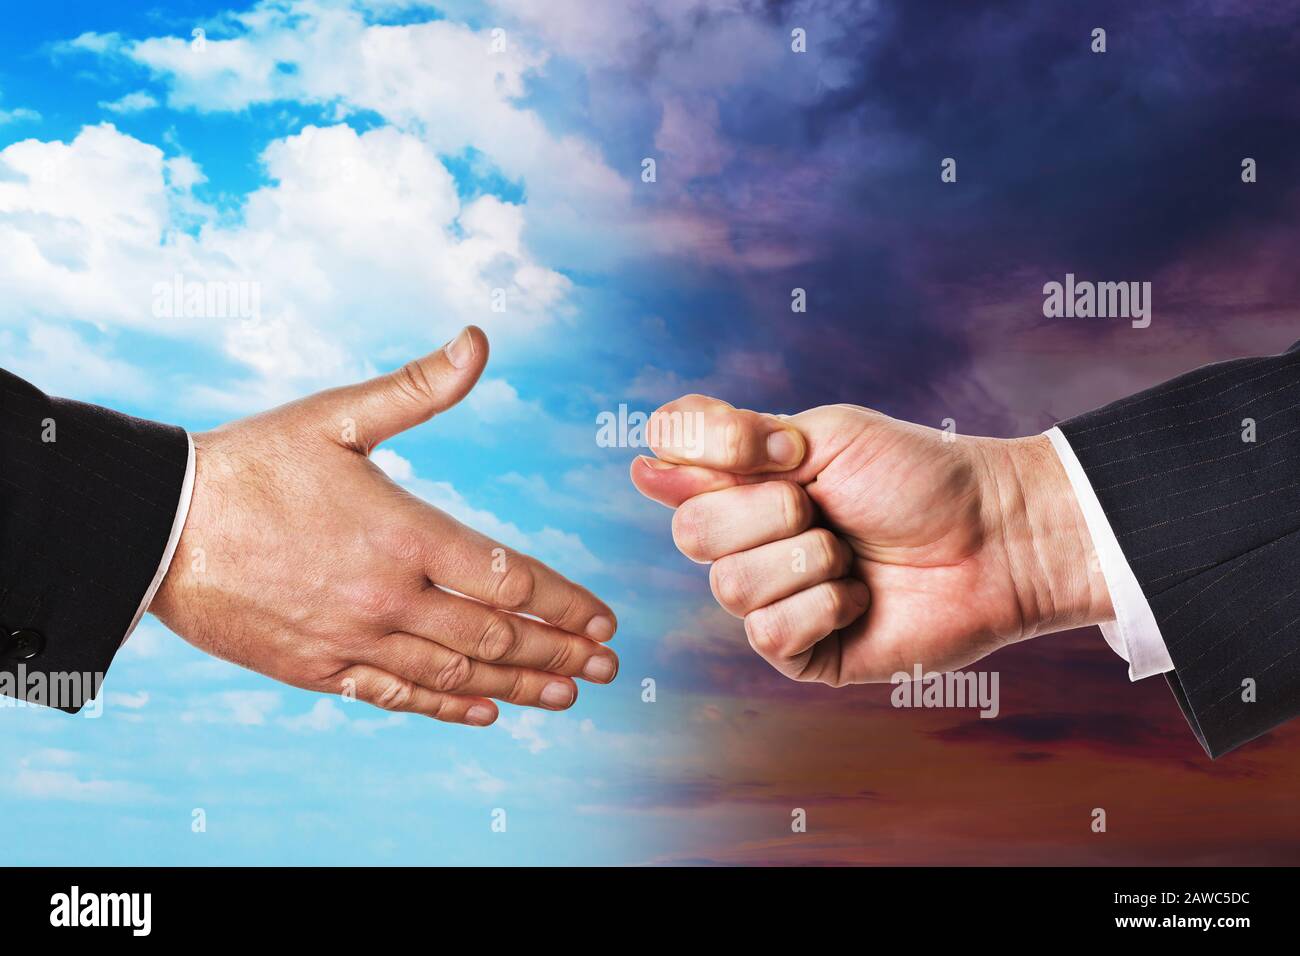 Two hands on a background of the sky with clouds. Concept on offering friendship and refusal Stock Photo